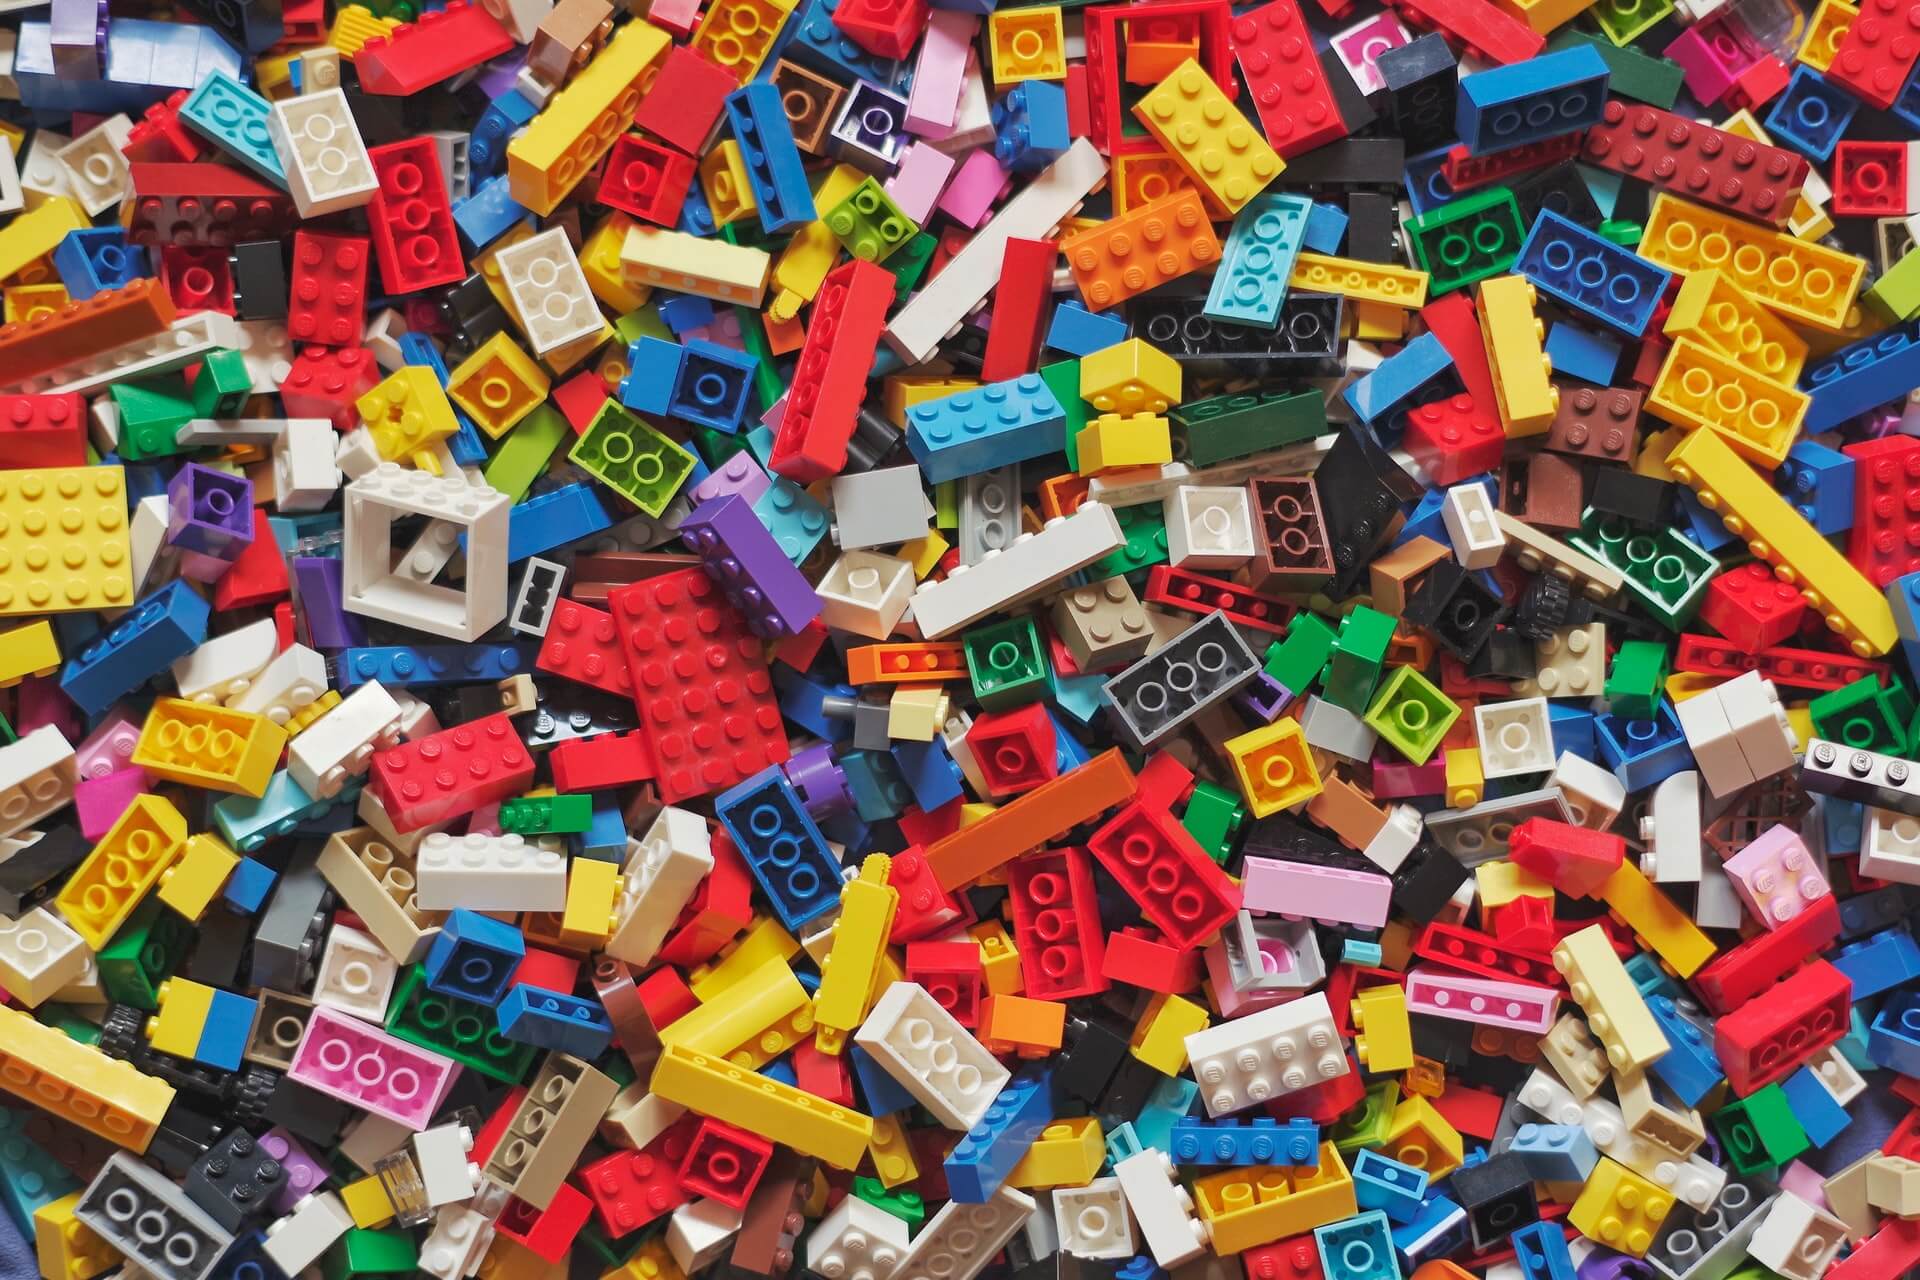 Assortment of LEGO bricks in different colors, sizes and shapes